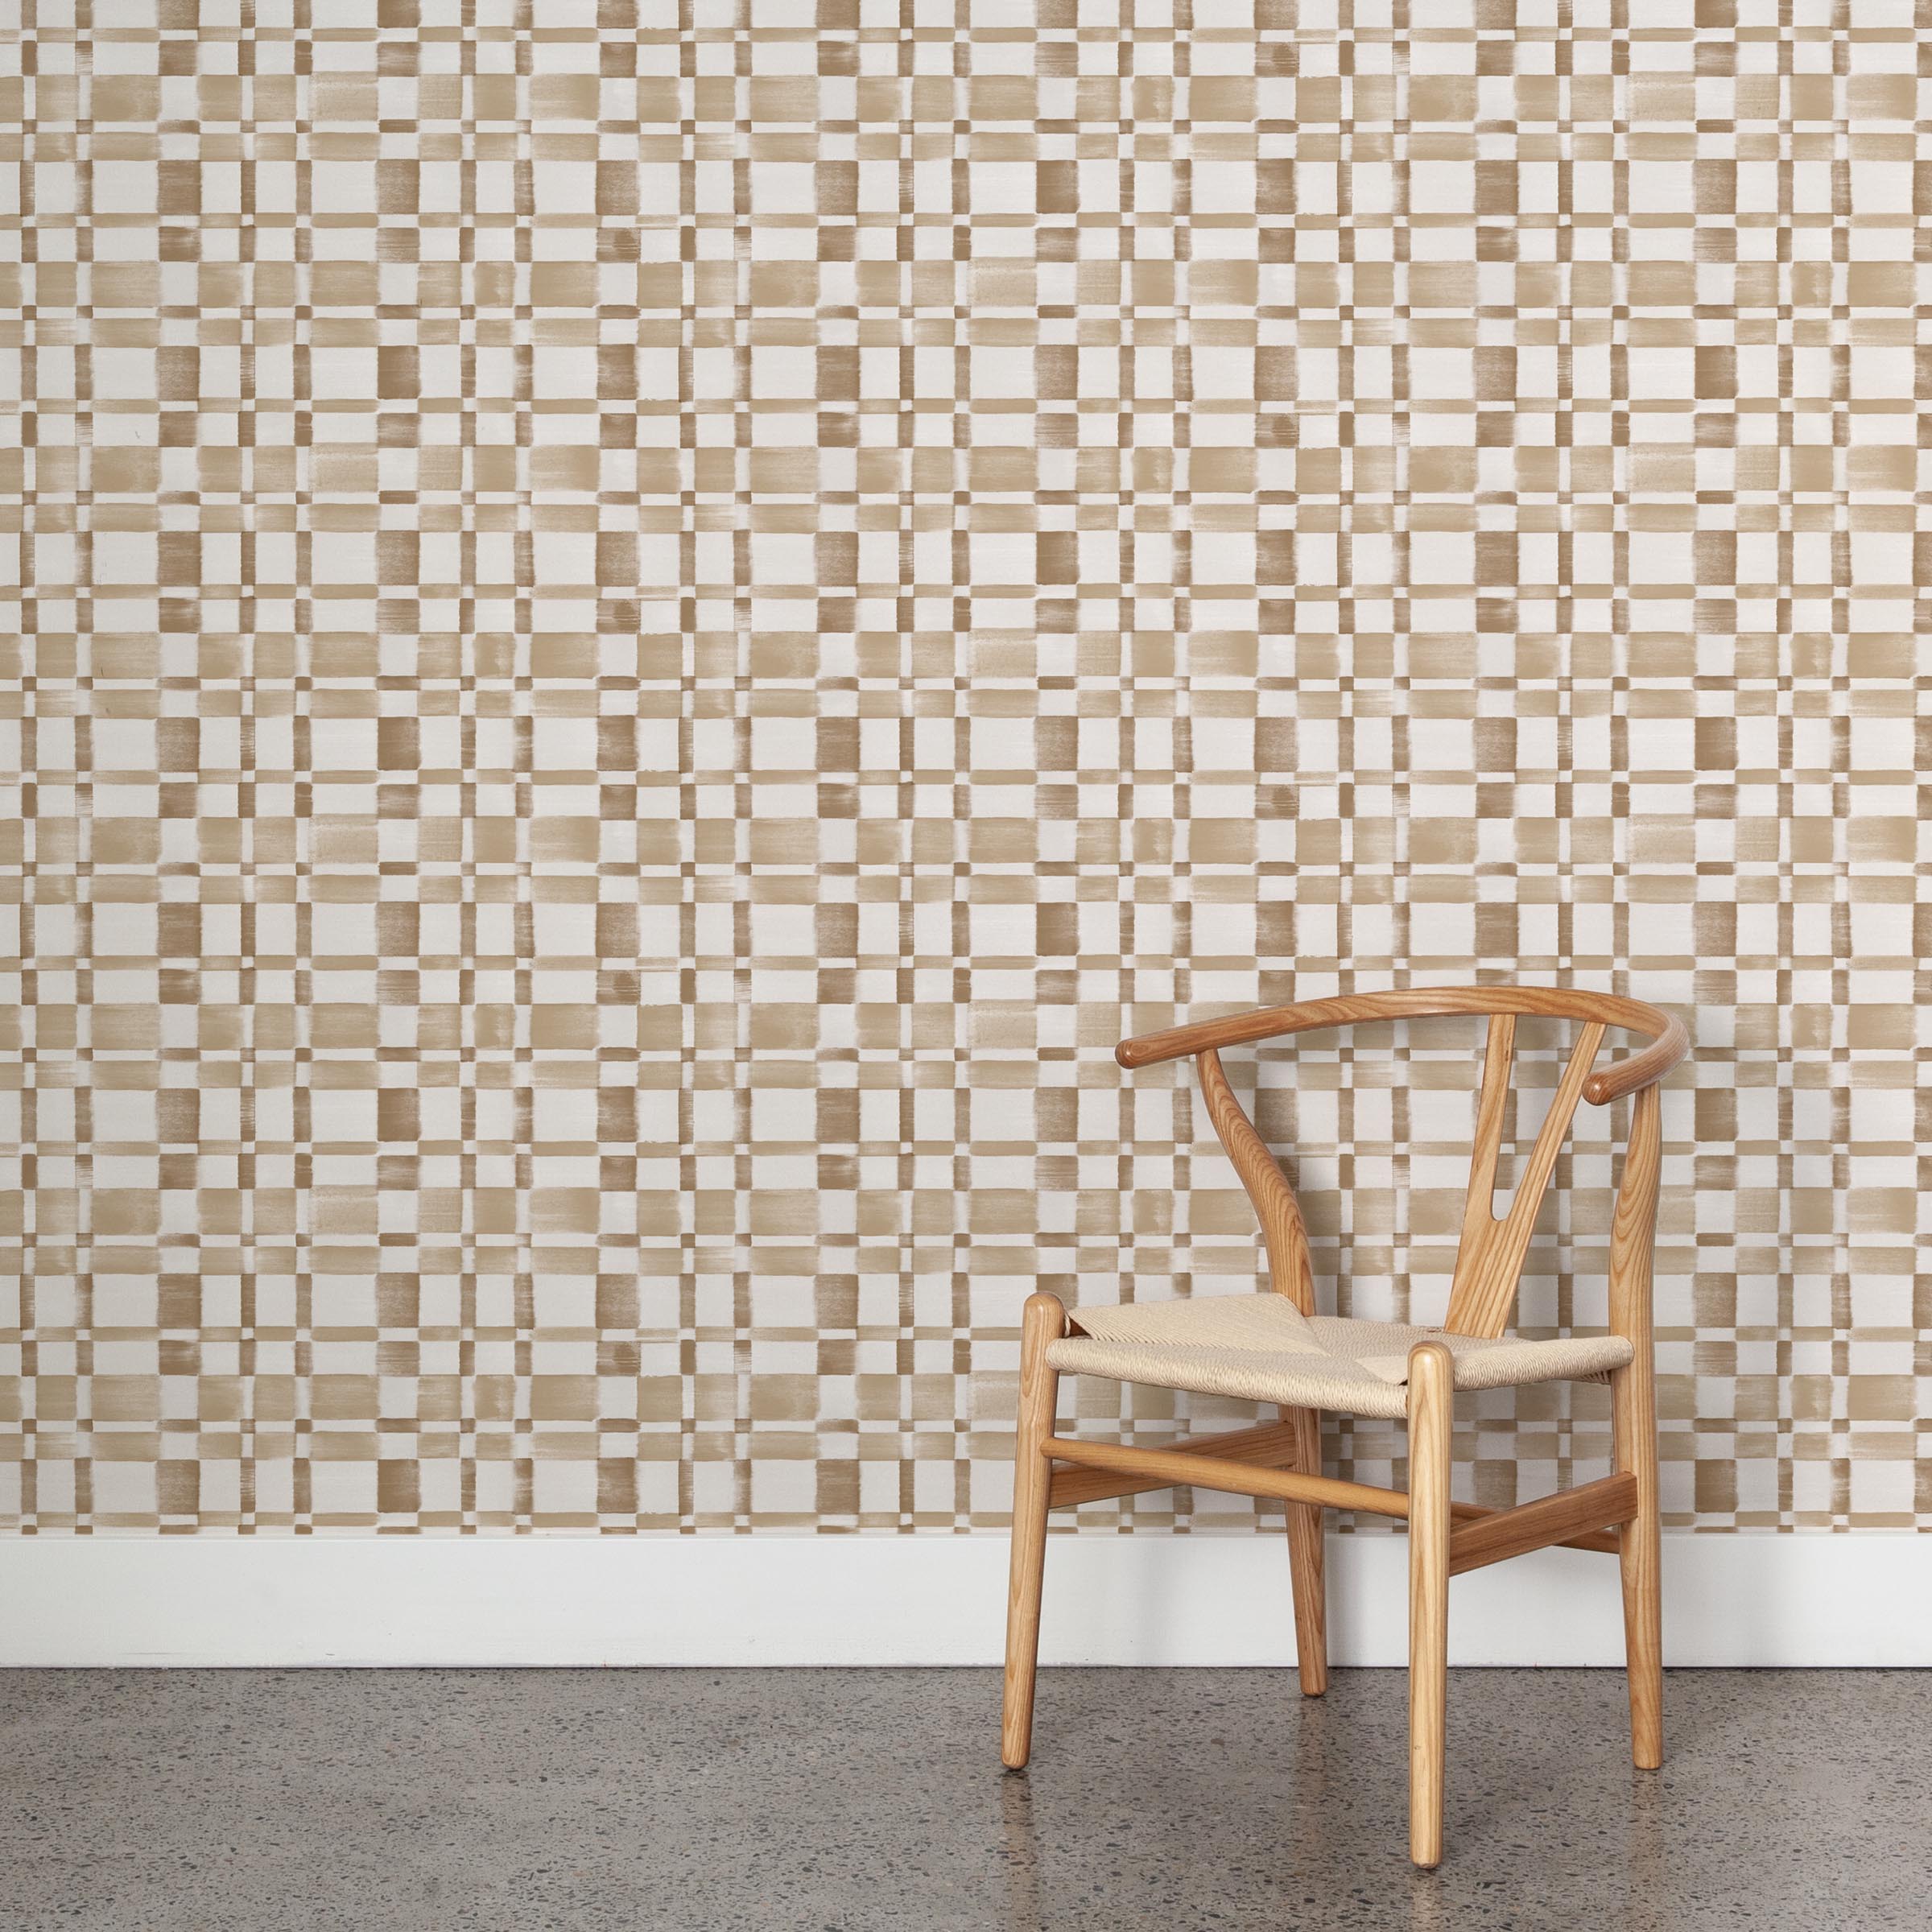 A wooden chair stands in front of a wall papered in a large-scale checked pattern in shades of brown and white.